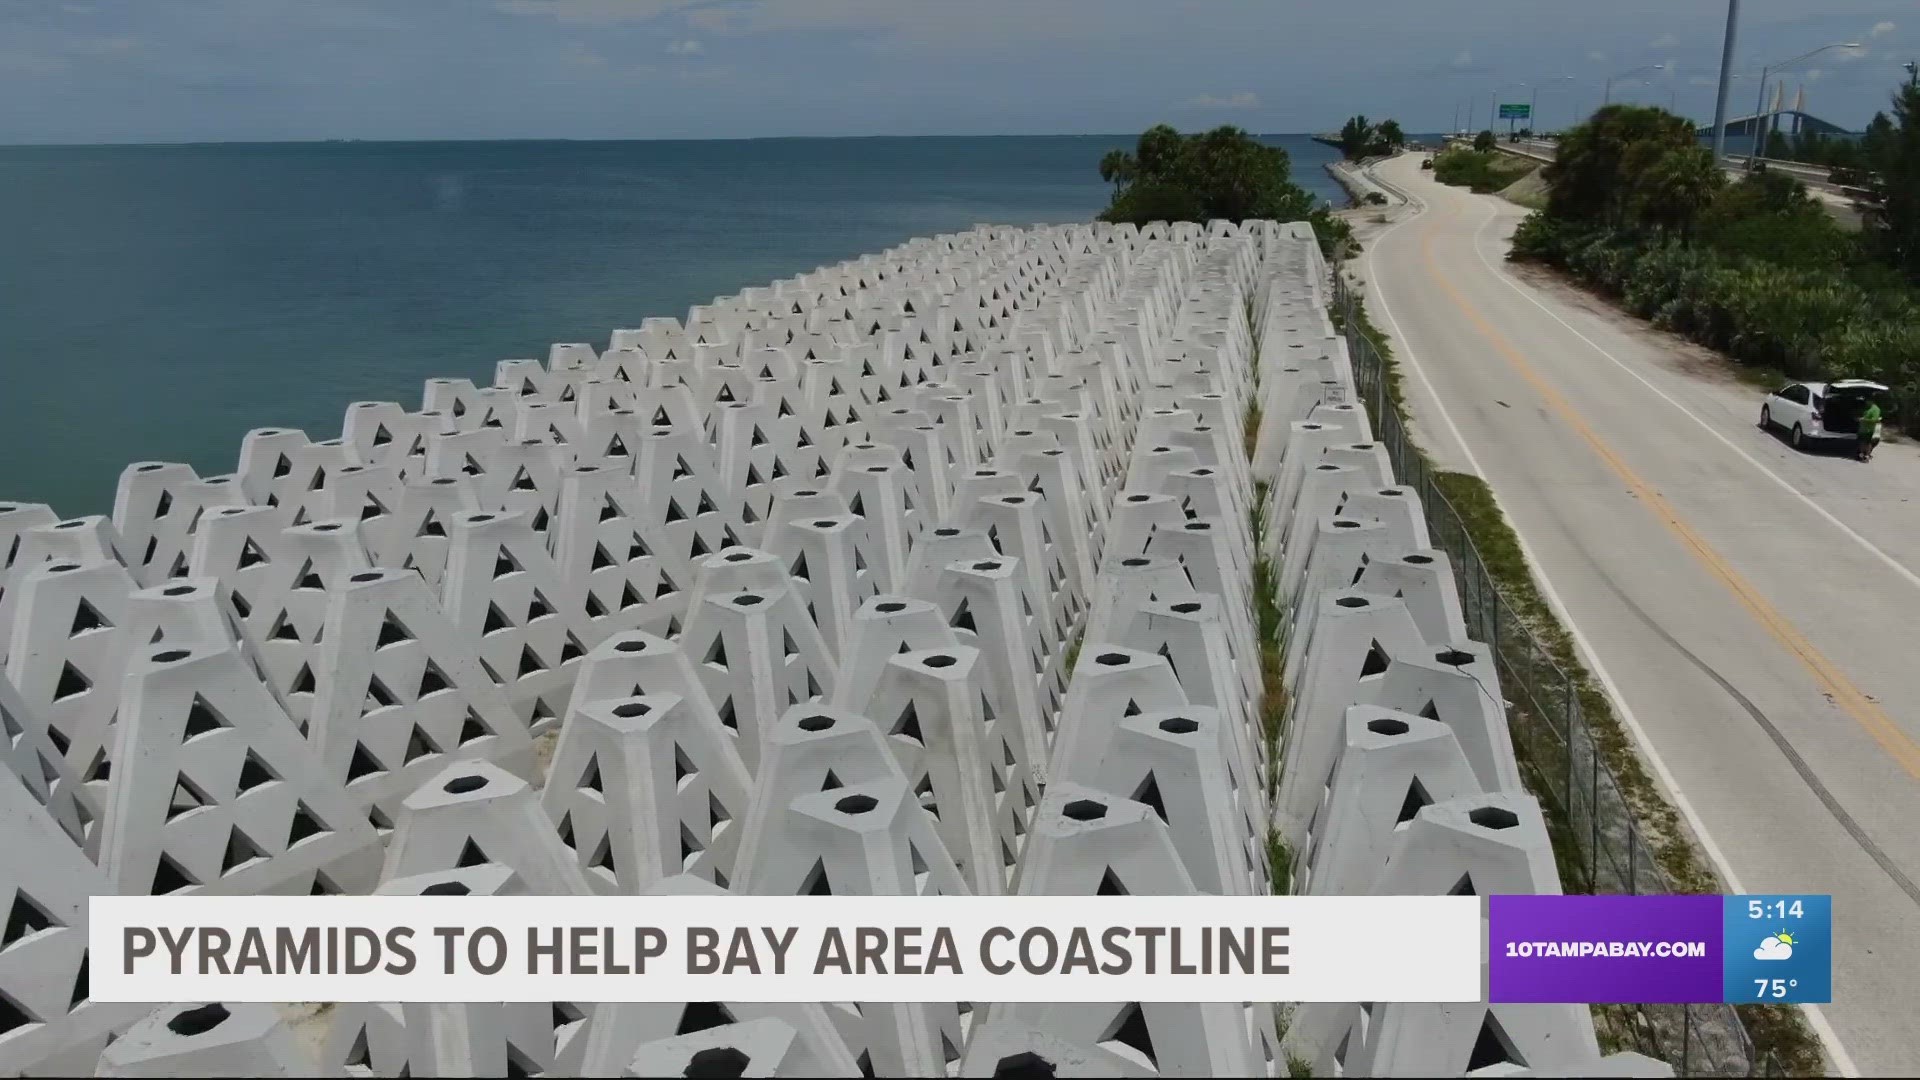 The cement pyramids work to reduce wave energy and protect against erosion along the infrastructure.